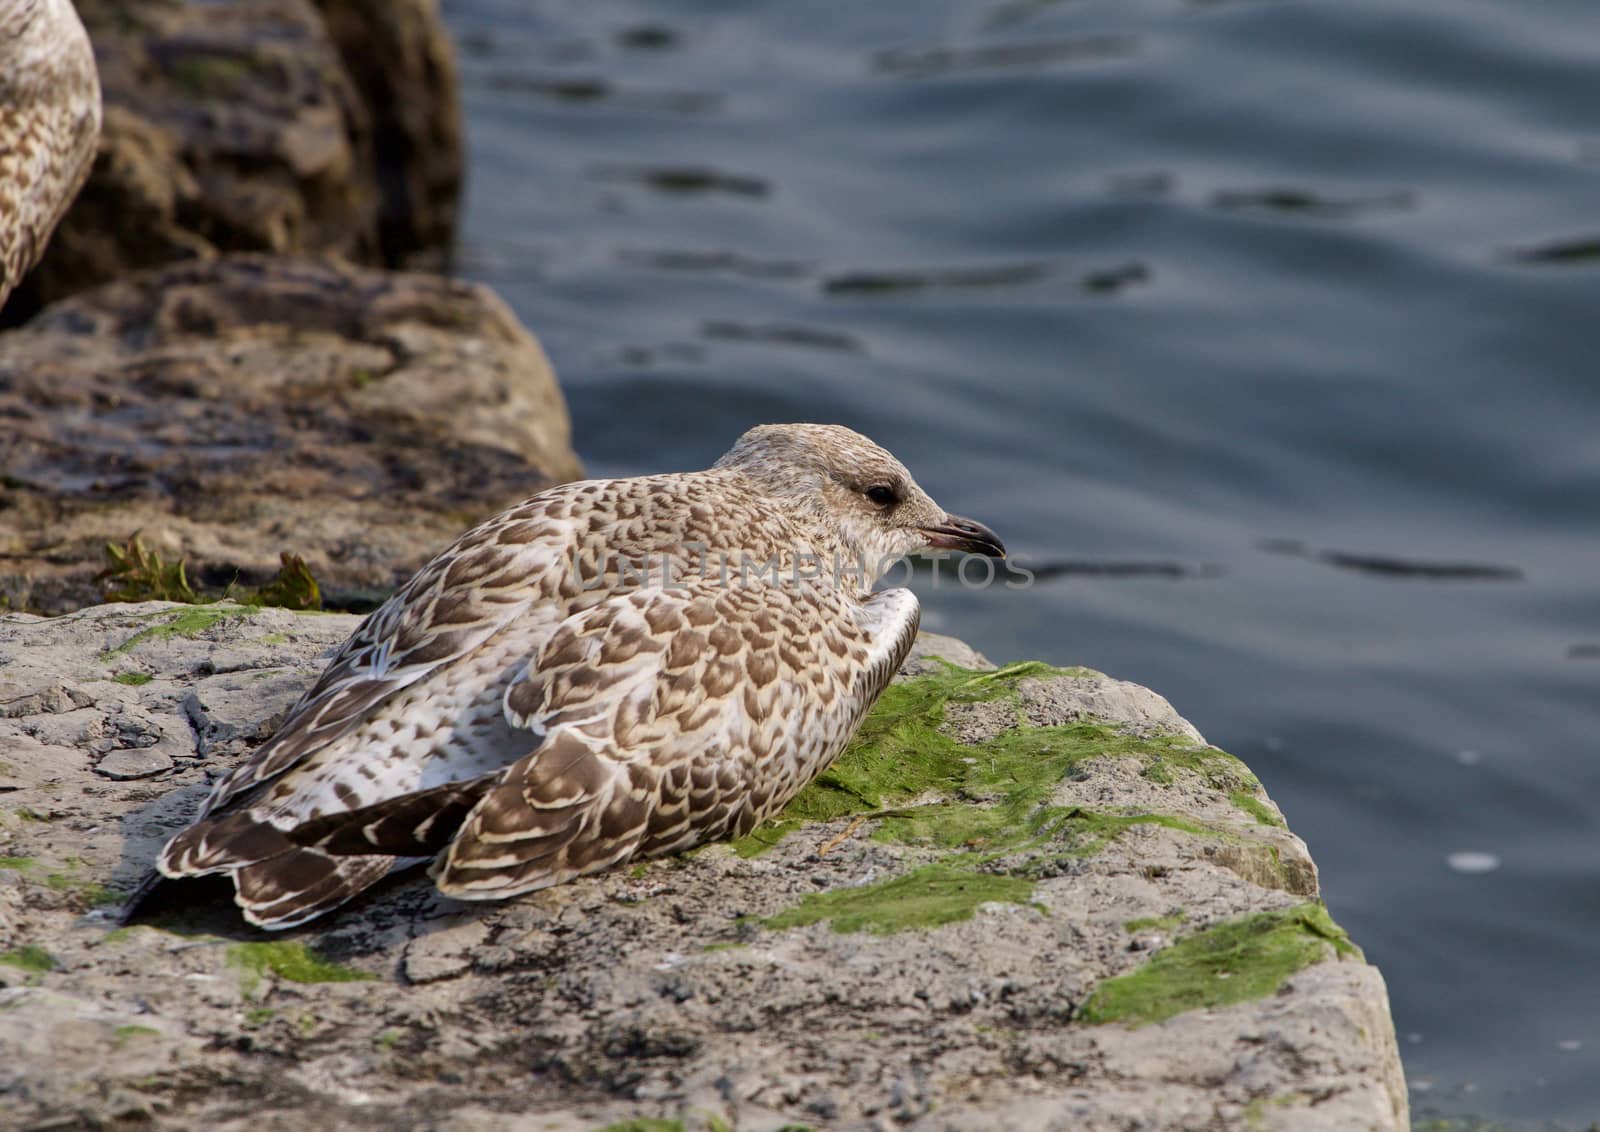 The lesser black-backed gull is sleeping on the rock shore near the water